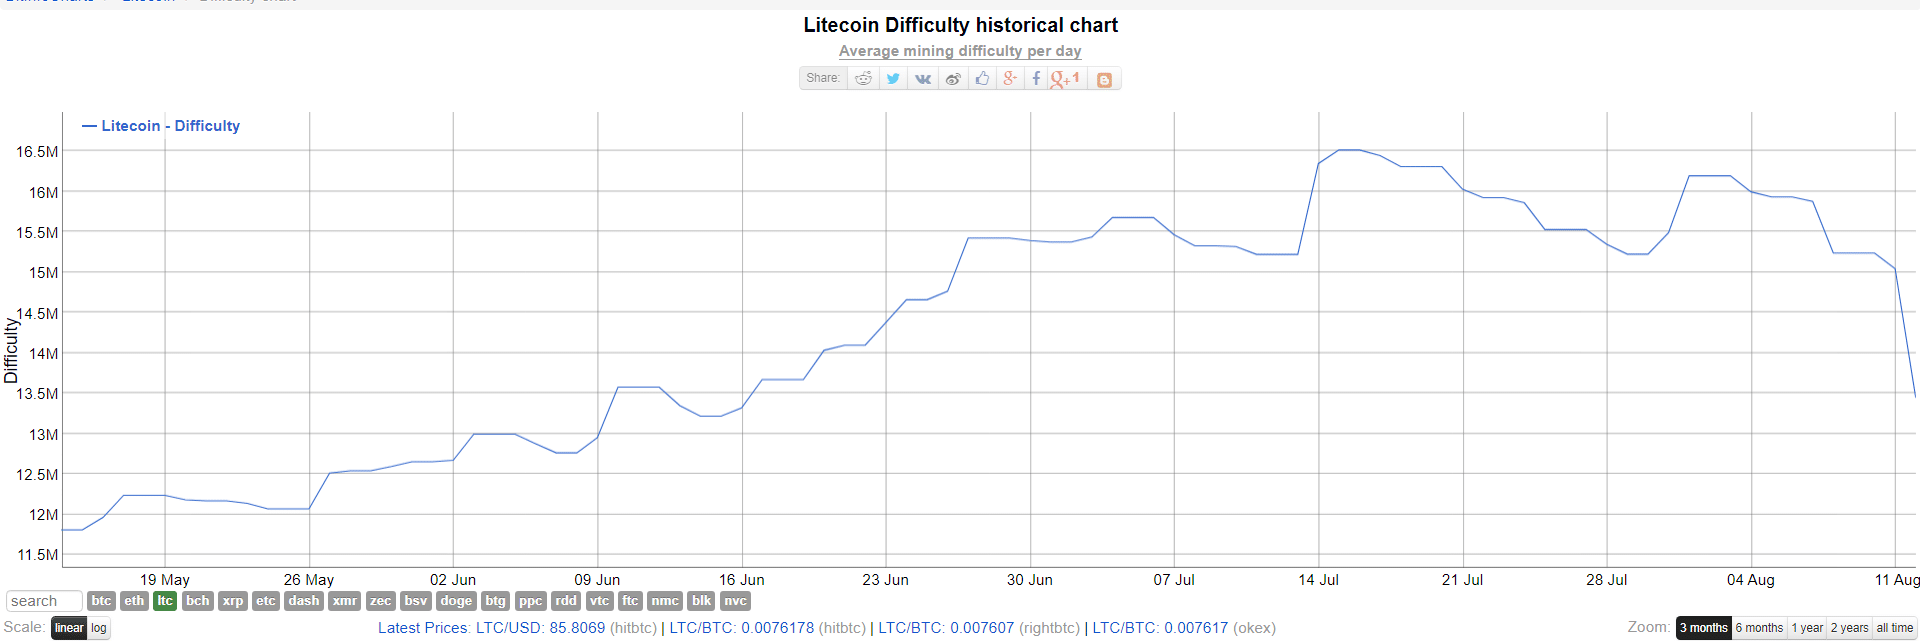 Litecoin Mining Difficulty Keeps Hitting New Highs